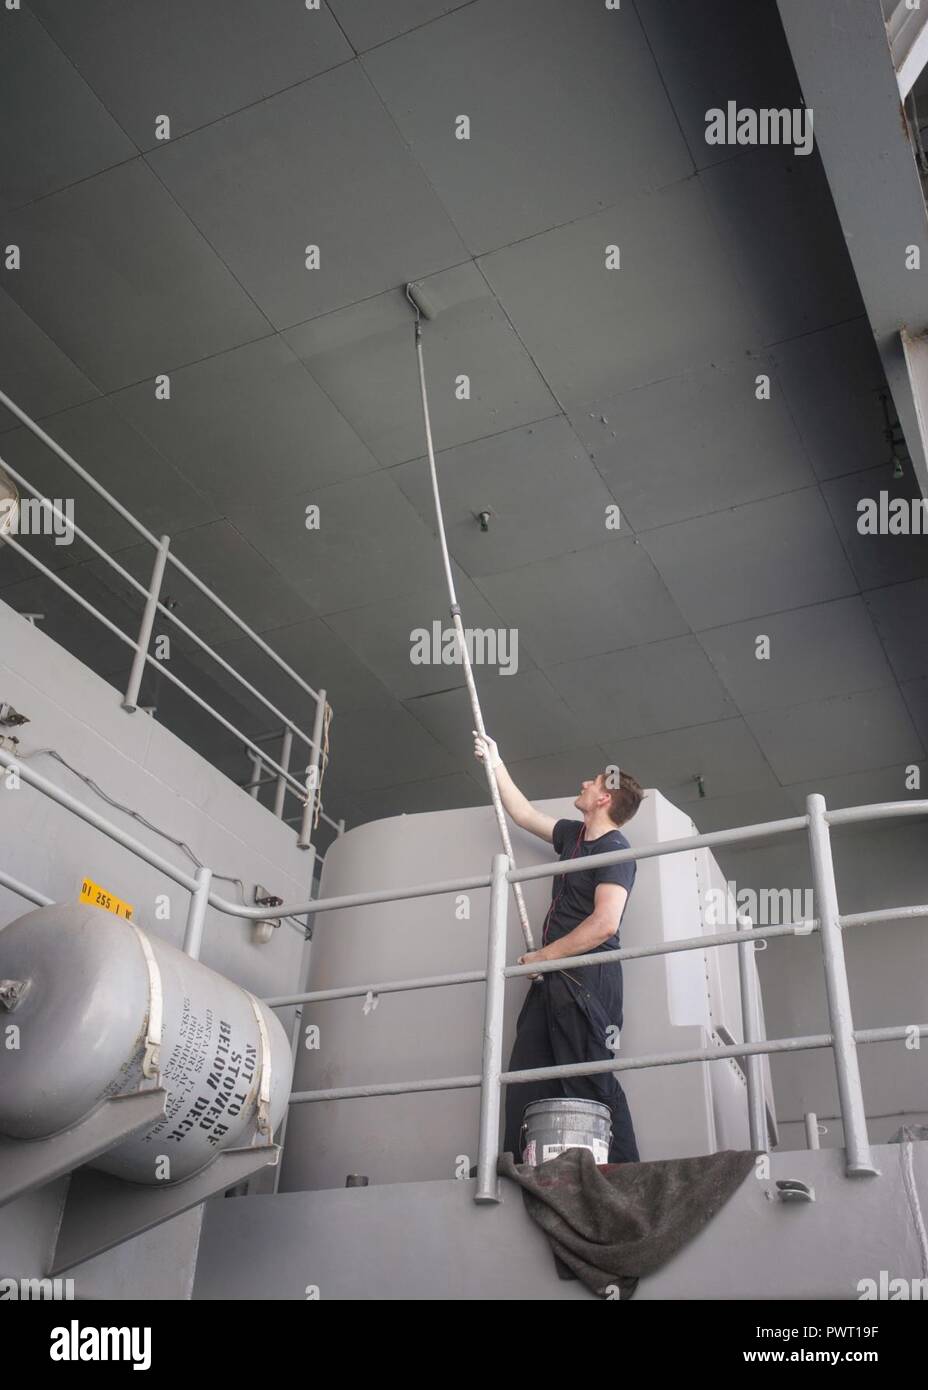 MEDITERRANEAN SEA (June 26, 2017) Seaman Robert Mucka repaints the overhead on the fantail of the aircraft carrier USS George H.W. Bush (CVN 77) (GHWB). GHWB, part of the George H.W. Bush Carrier Strike Group (GHWBCSG), is conducting naval operations in the U.S. 6th Fleet area of operations in support of U.S. national security interests in Europe and Africa. ( Stock Photo